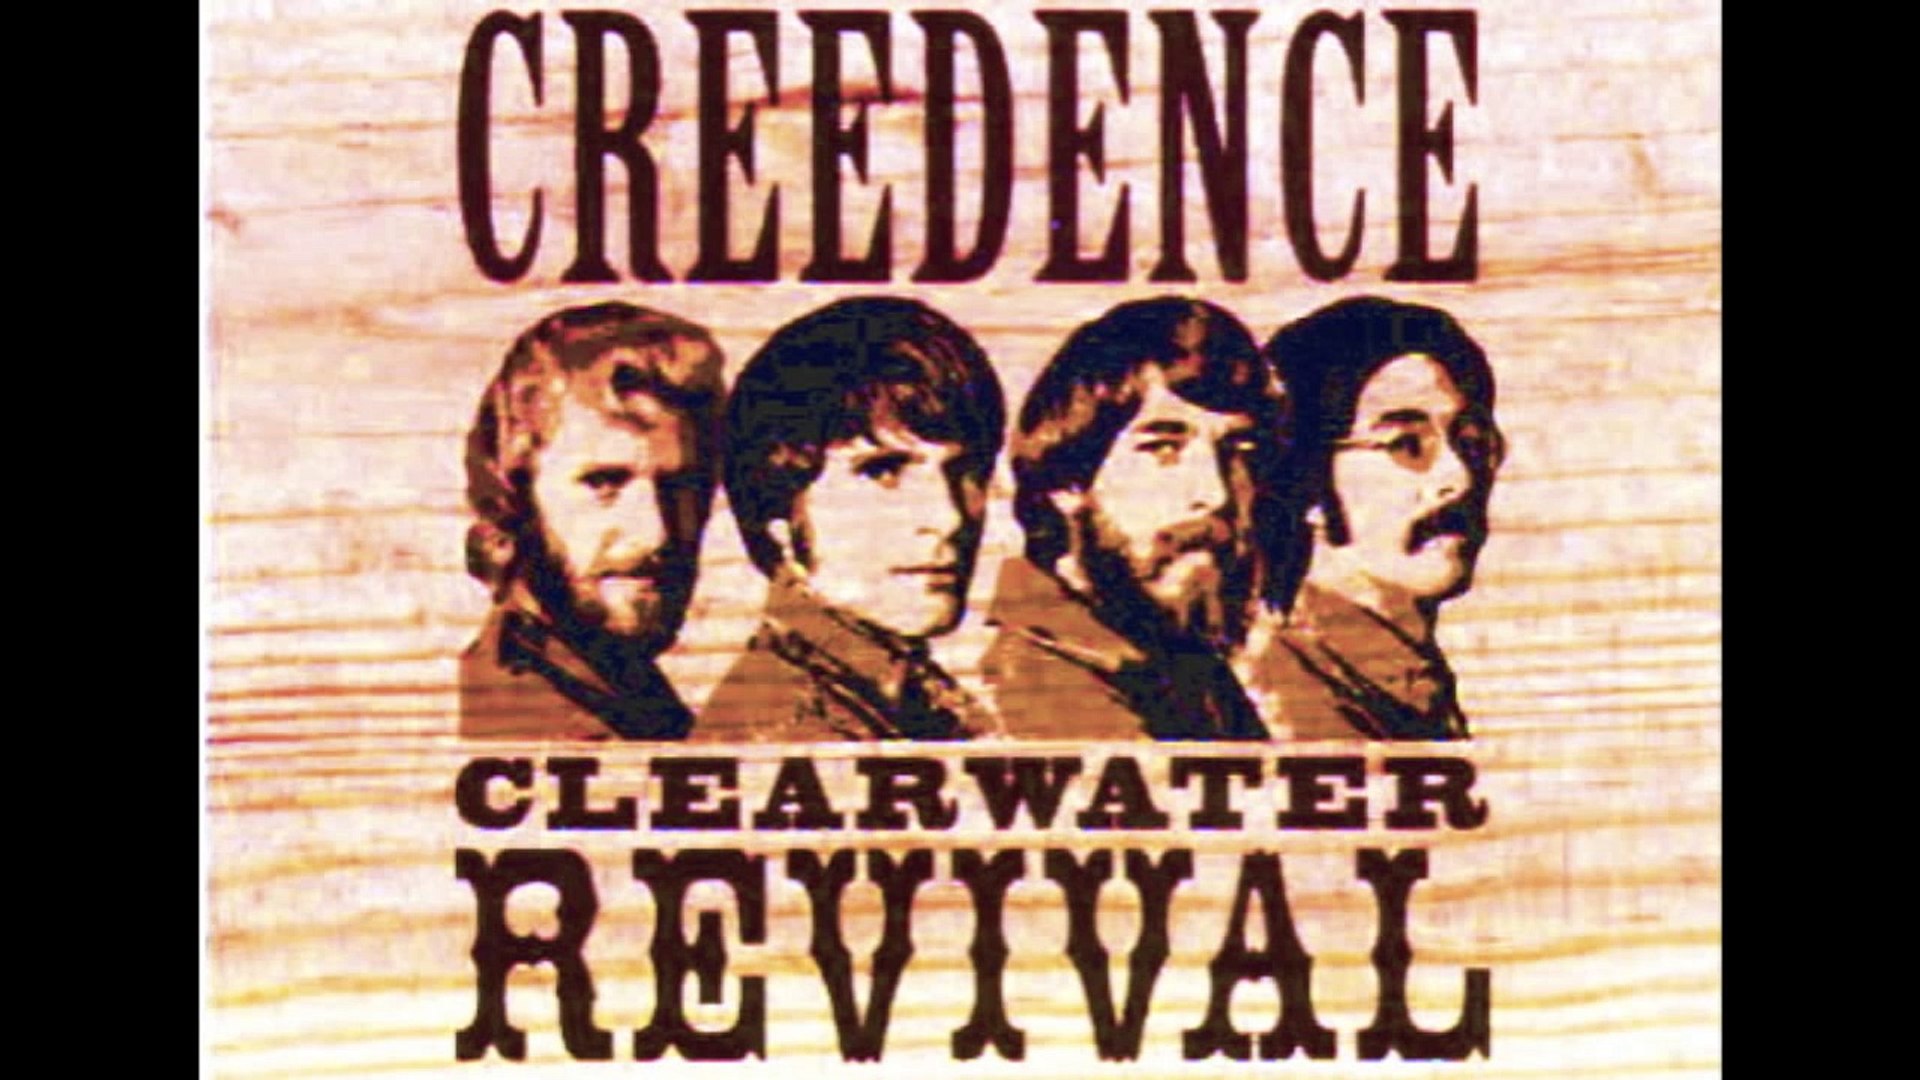 ⁣Creedence Clearwater Revival - Susie Q